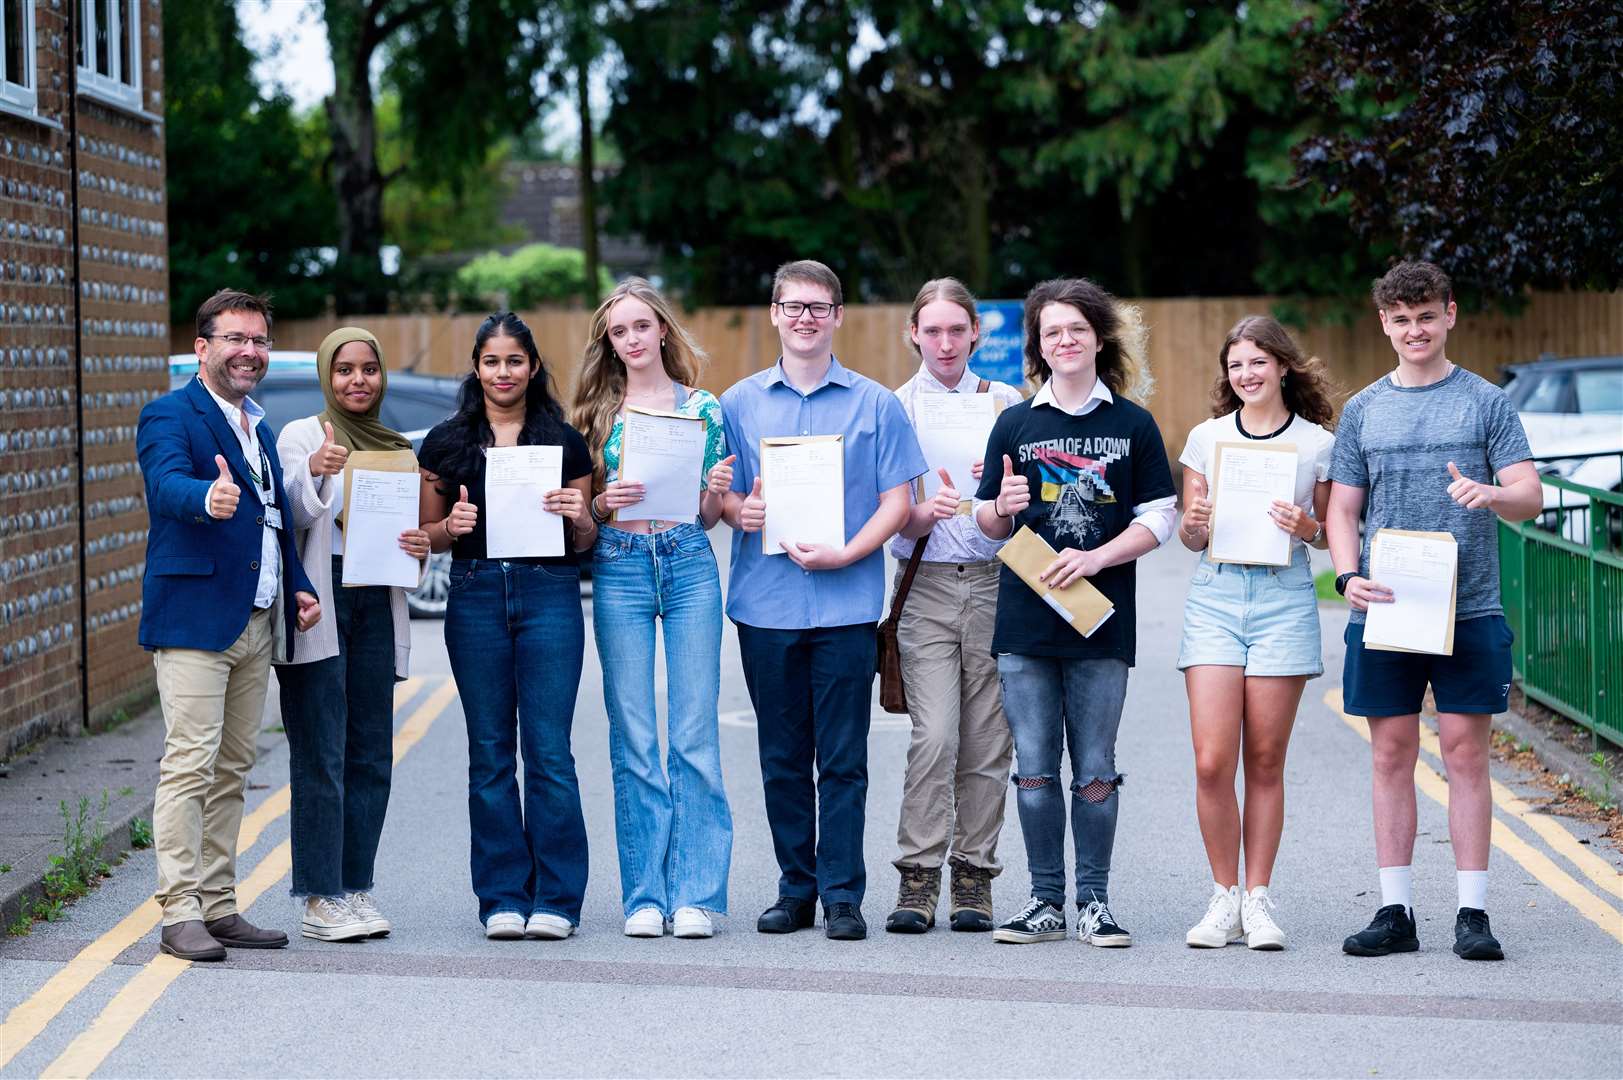 A-Level results at King's Lynn's Springwood High School, with head teacher and CEO of West Norfolk Academies Trust (WNAT) Andy Johnson, far left